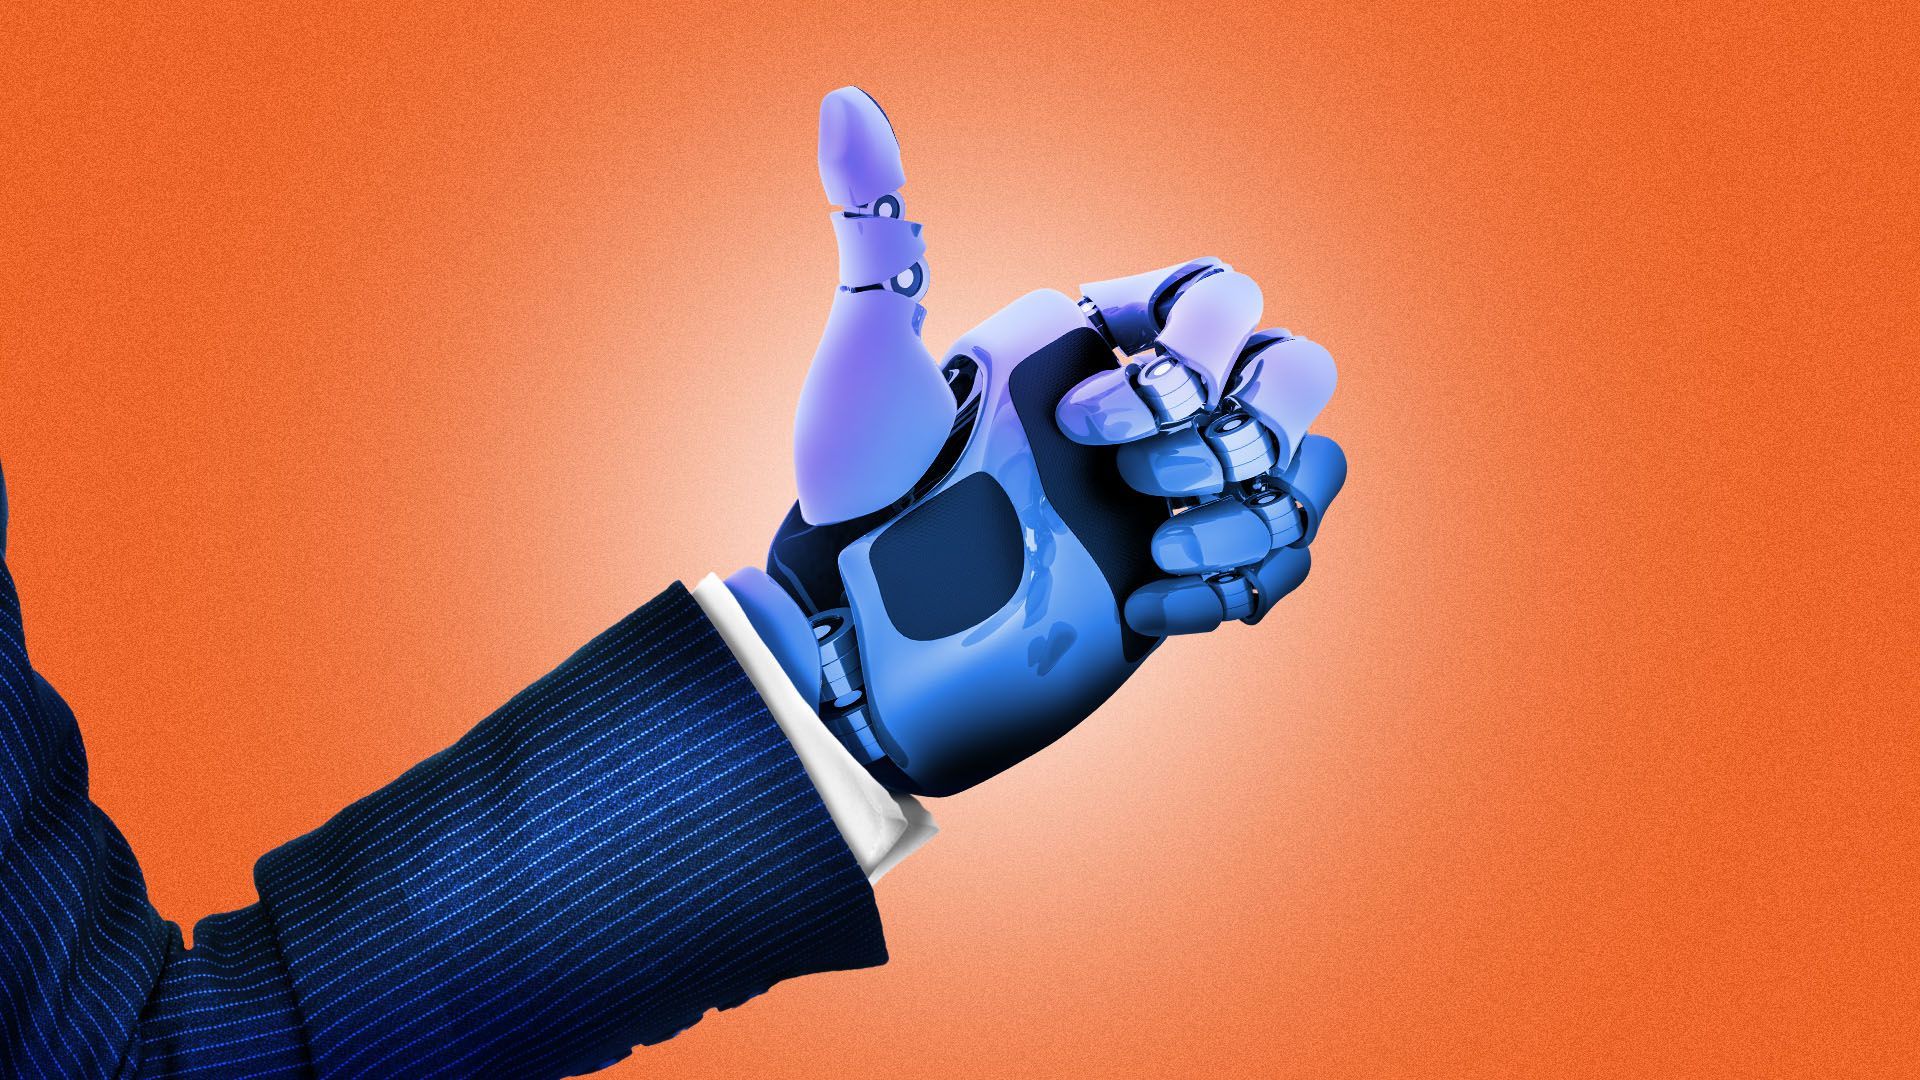 Illustration of a robot hand in a suit giving a thumbs up